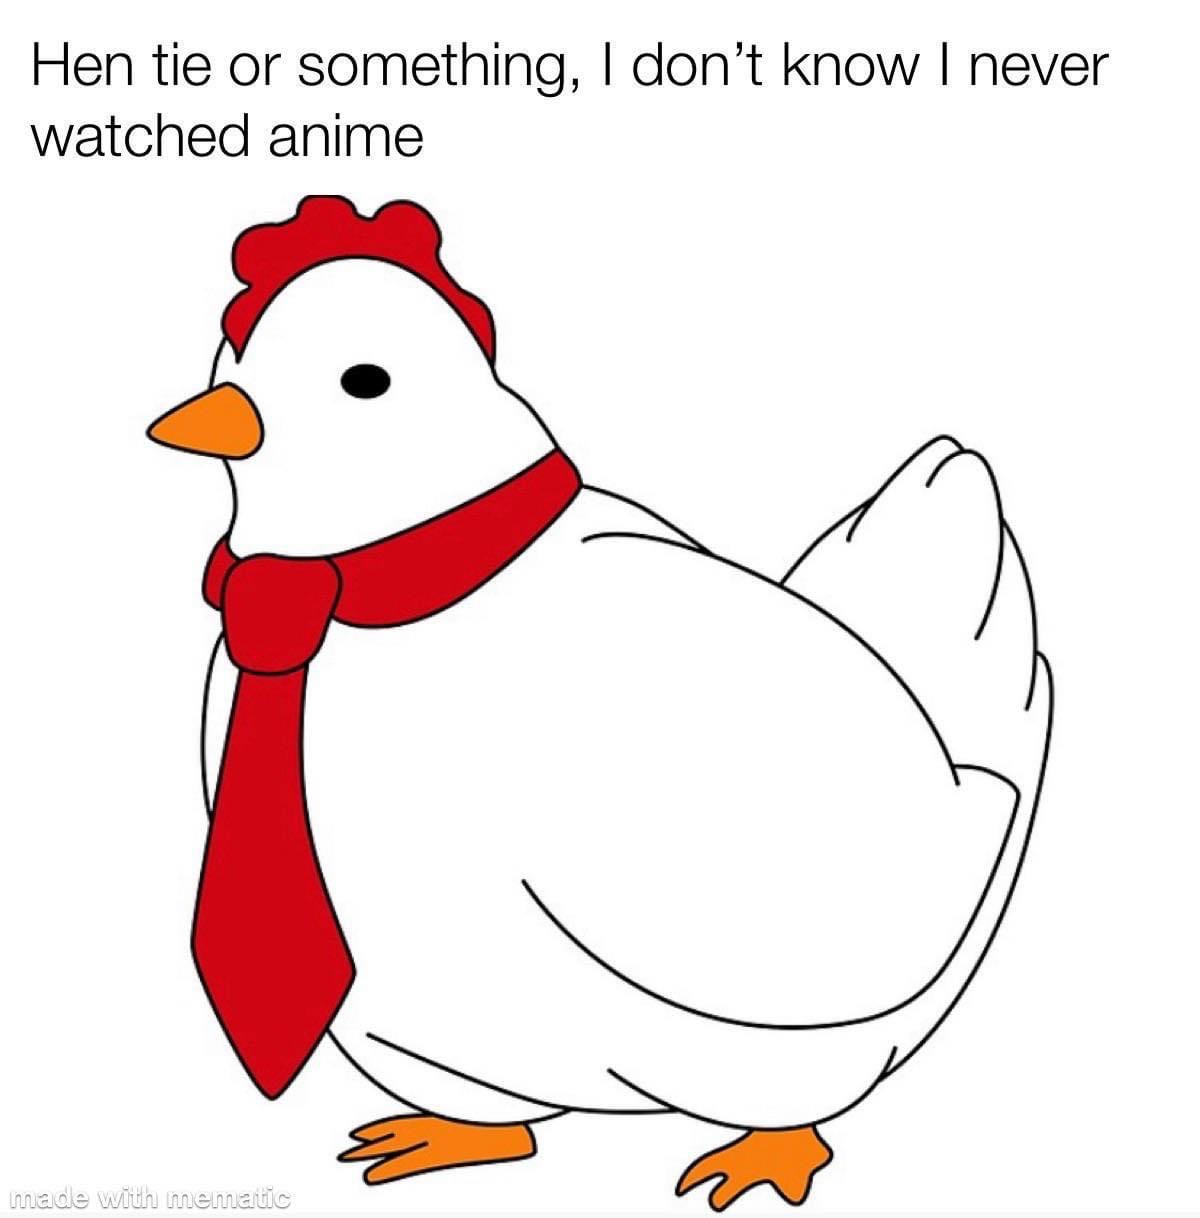 funny pics - Hen tie or something, I don't know I never watched anime